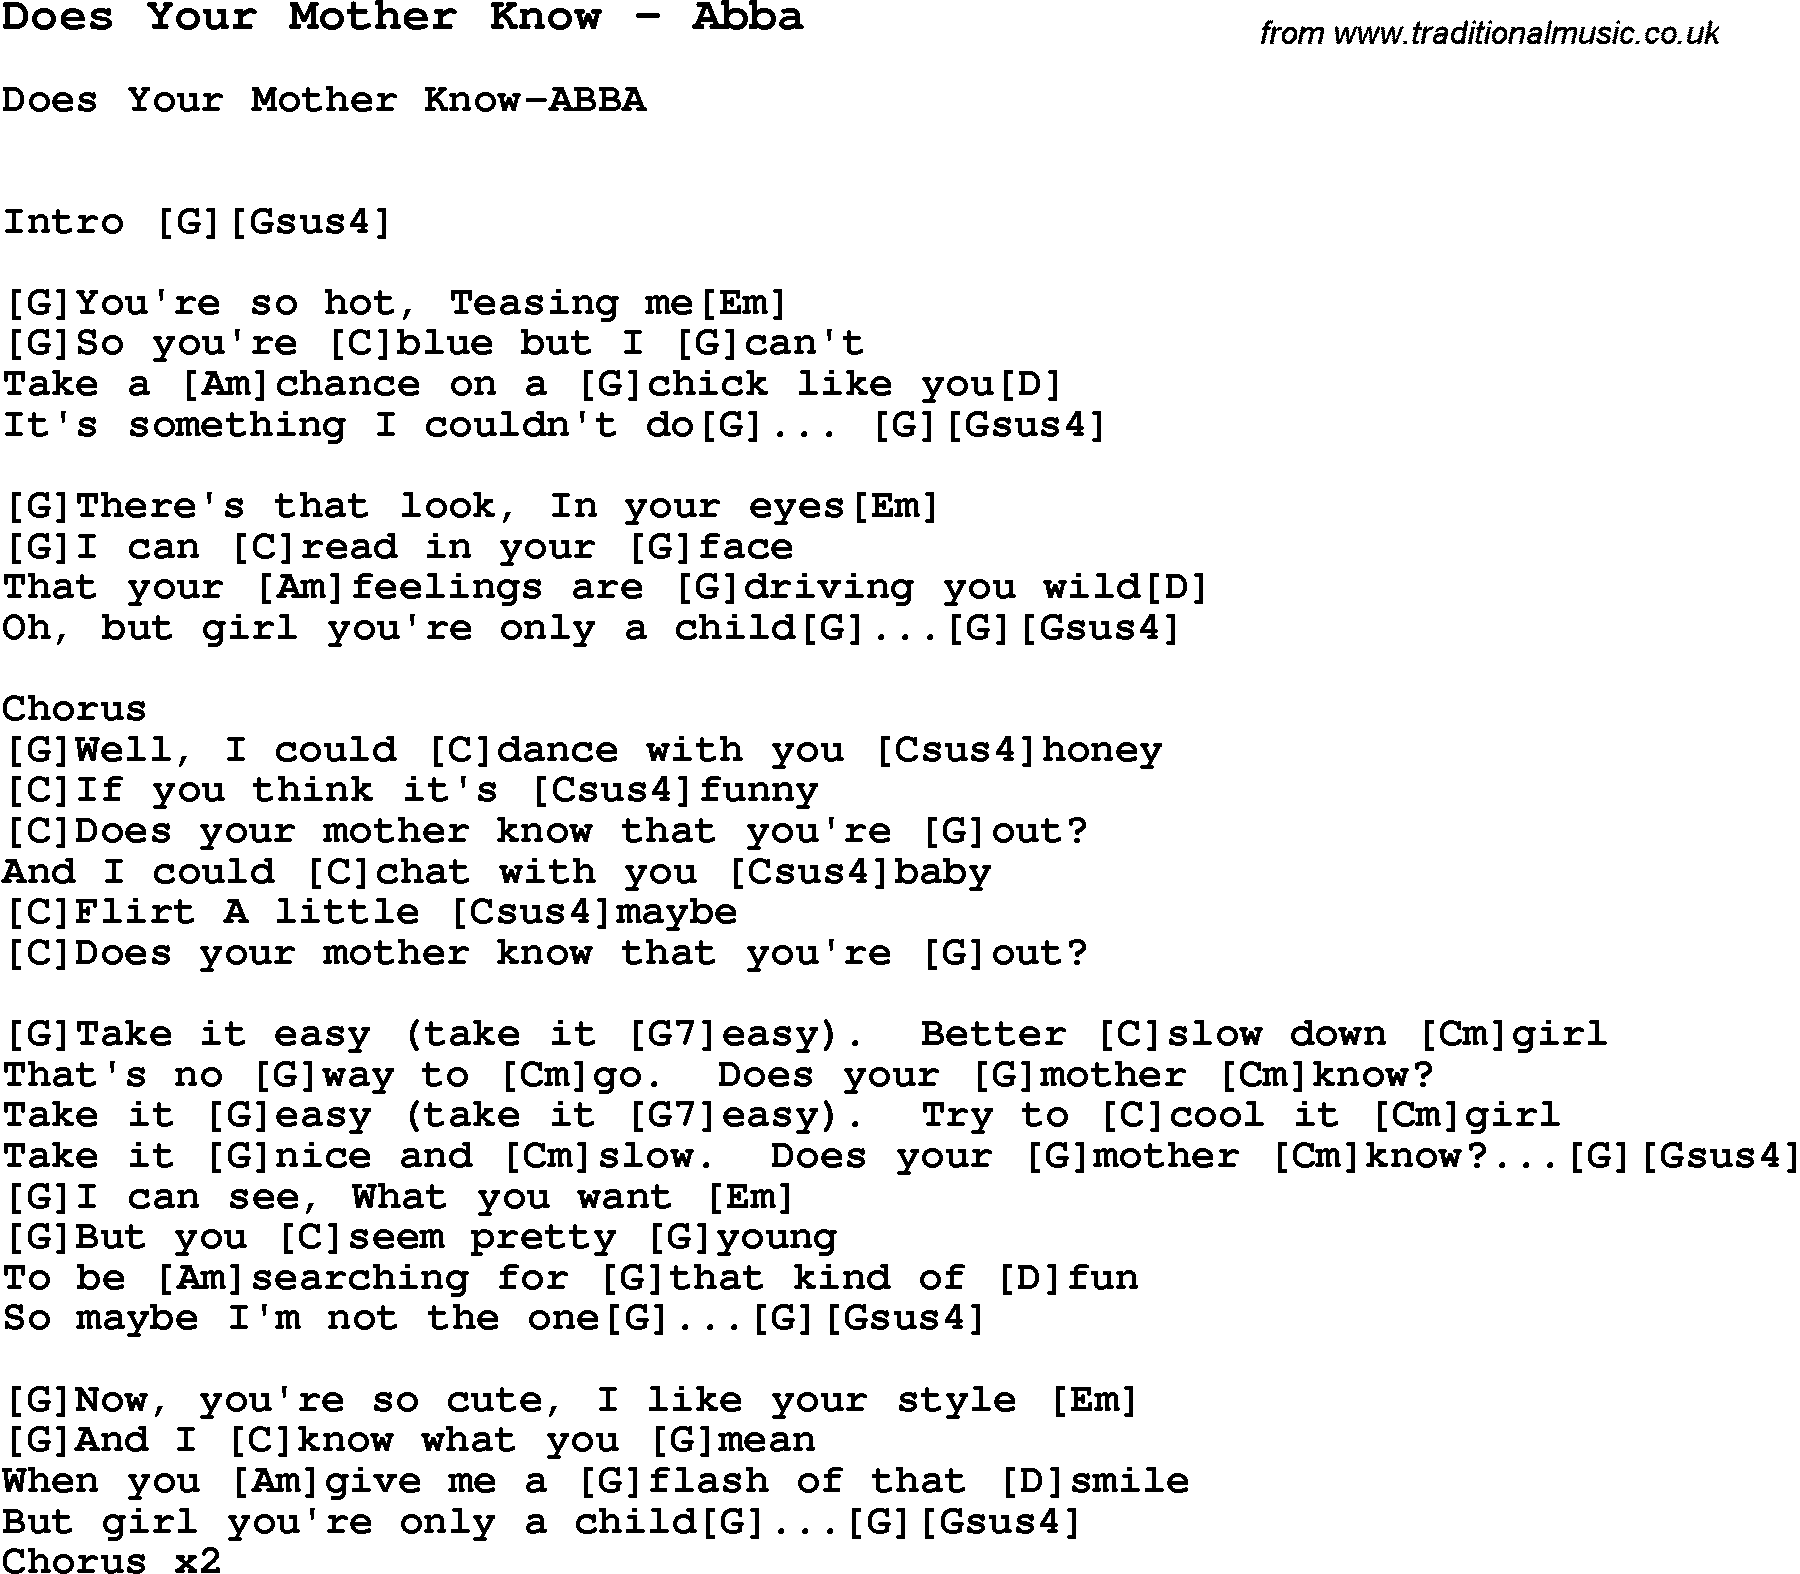 Song Does Your Mother Know by Abba, with lyrics for vocal performance and accompaniment chords for Ukulele, Guitar Banjo etc.